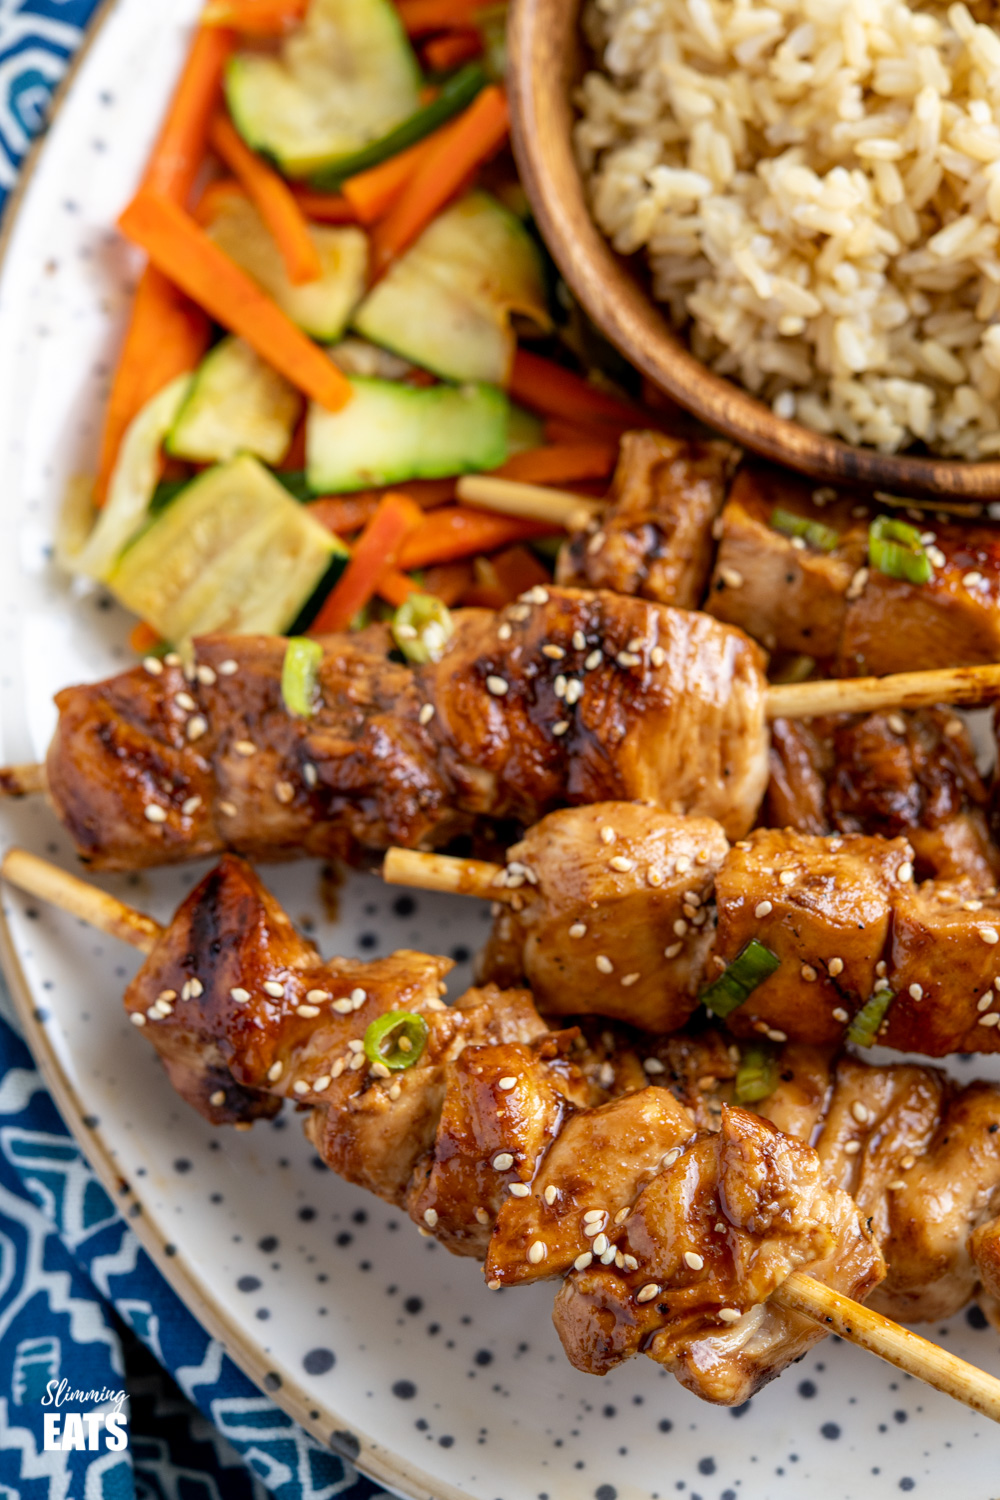 close up Yakitori Chicken Skewers on speckled plate with a bamboo bowl of brown rice and side fo sesame vegetables